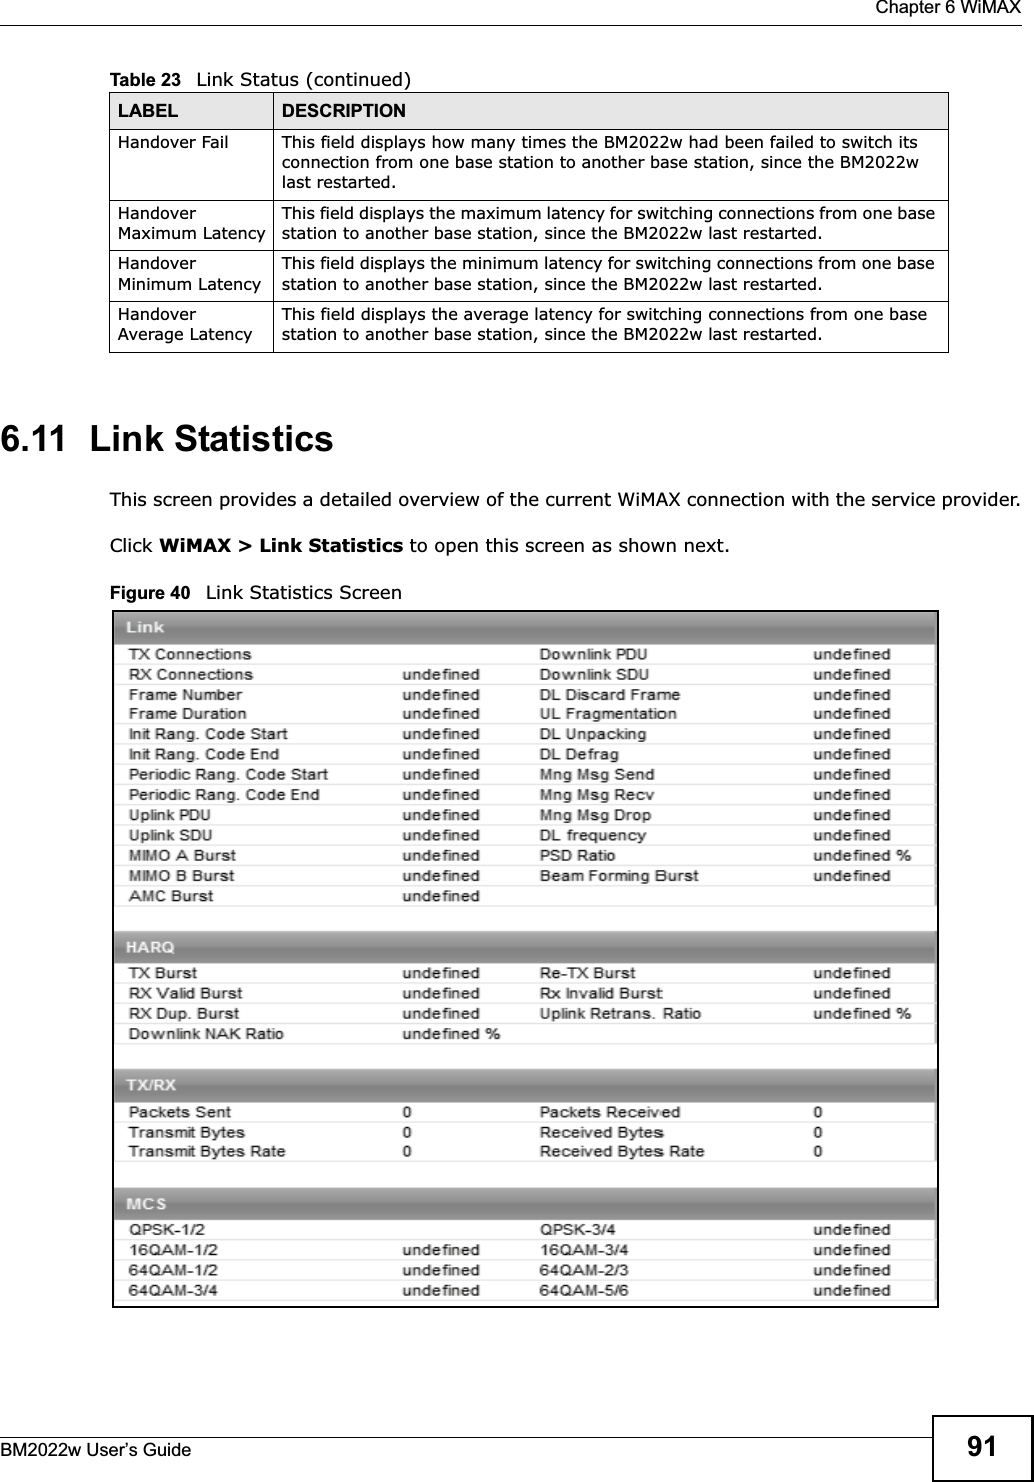  Chapter 6 WiMAXBM2022w User’s Guide 916.11  Link StatisticsThis screen provides a detailed overview of the current WiMAX connection with the service provider.Click WiMAX &gt; Link Statistics to open this screen as shown next.Figure 40   Link Statistics ScreenHandover Fail This field displays how many times the BM2022w had been failed to switch its connection from one base station to another base station, since the BM2022w last restarted.Handover Maximum LatencyThis field displays the maximum latency for switching connections from one base station to another base station, since the BM2022w last restarted. Handover Minimum LatencyThis field displays the minimum latency for switching connections from one base station to another base station, since the BM2022w last restarted. Handover Average LatencyThis field displays the average latency for switching connections from one base station to another base station, since the BM2022w last restarted. Table 23   Link Status (continued)LABEL DESCRIPTION